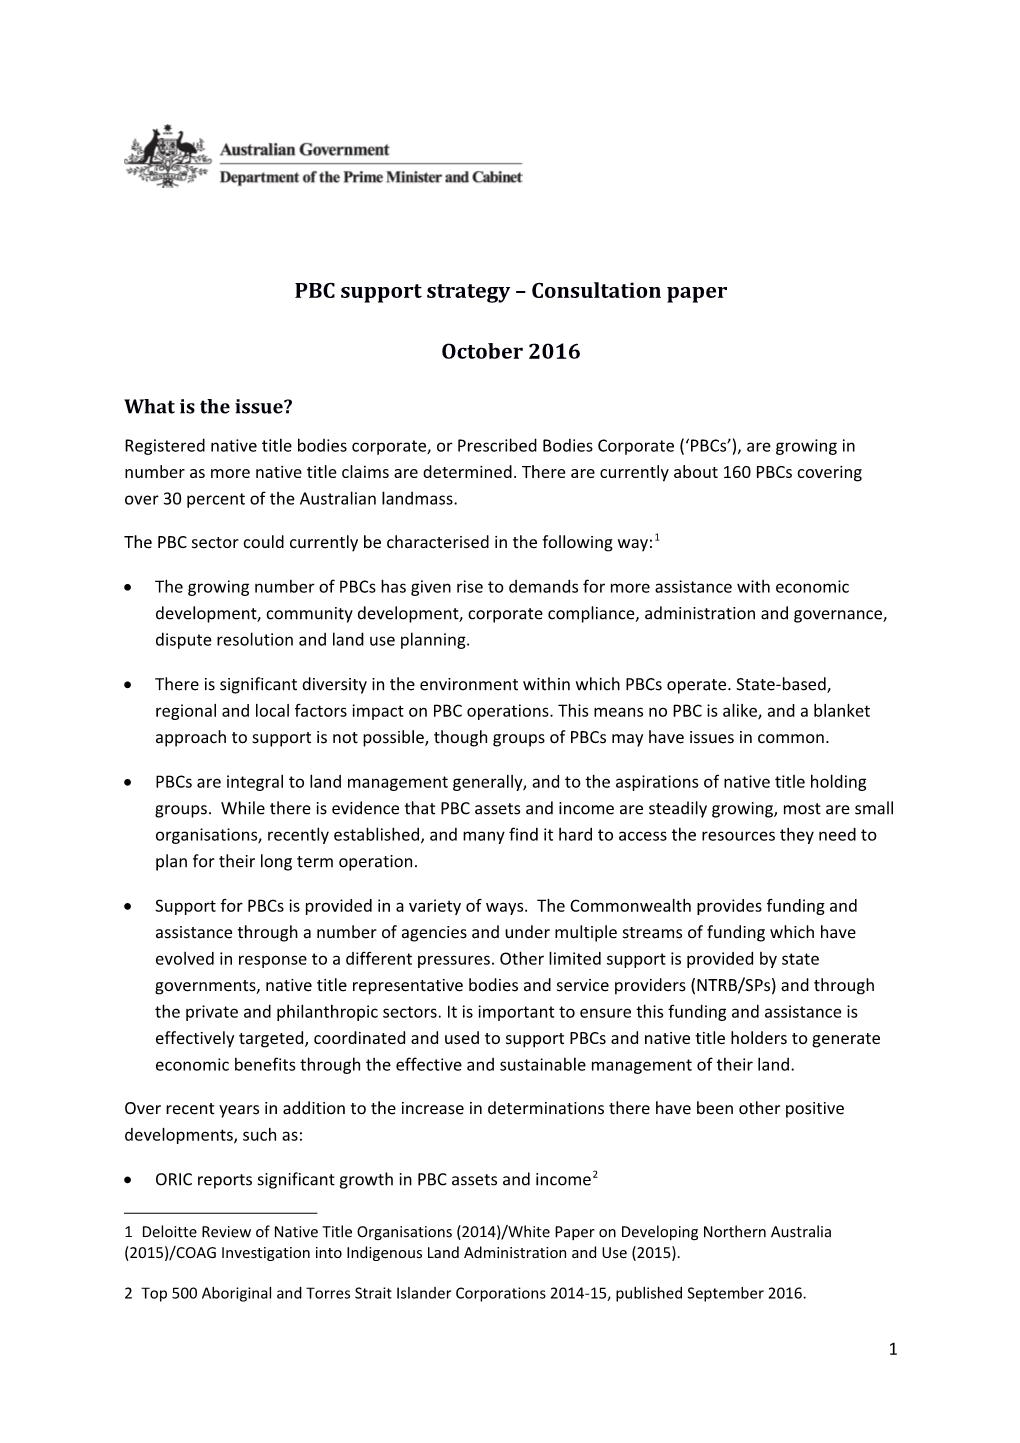 PBC Support Strategy Consultation Paper